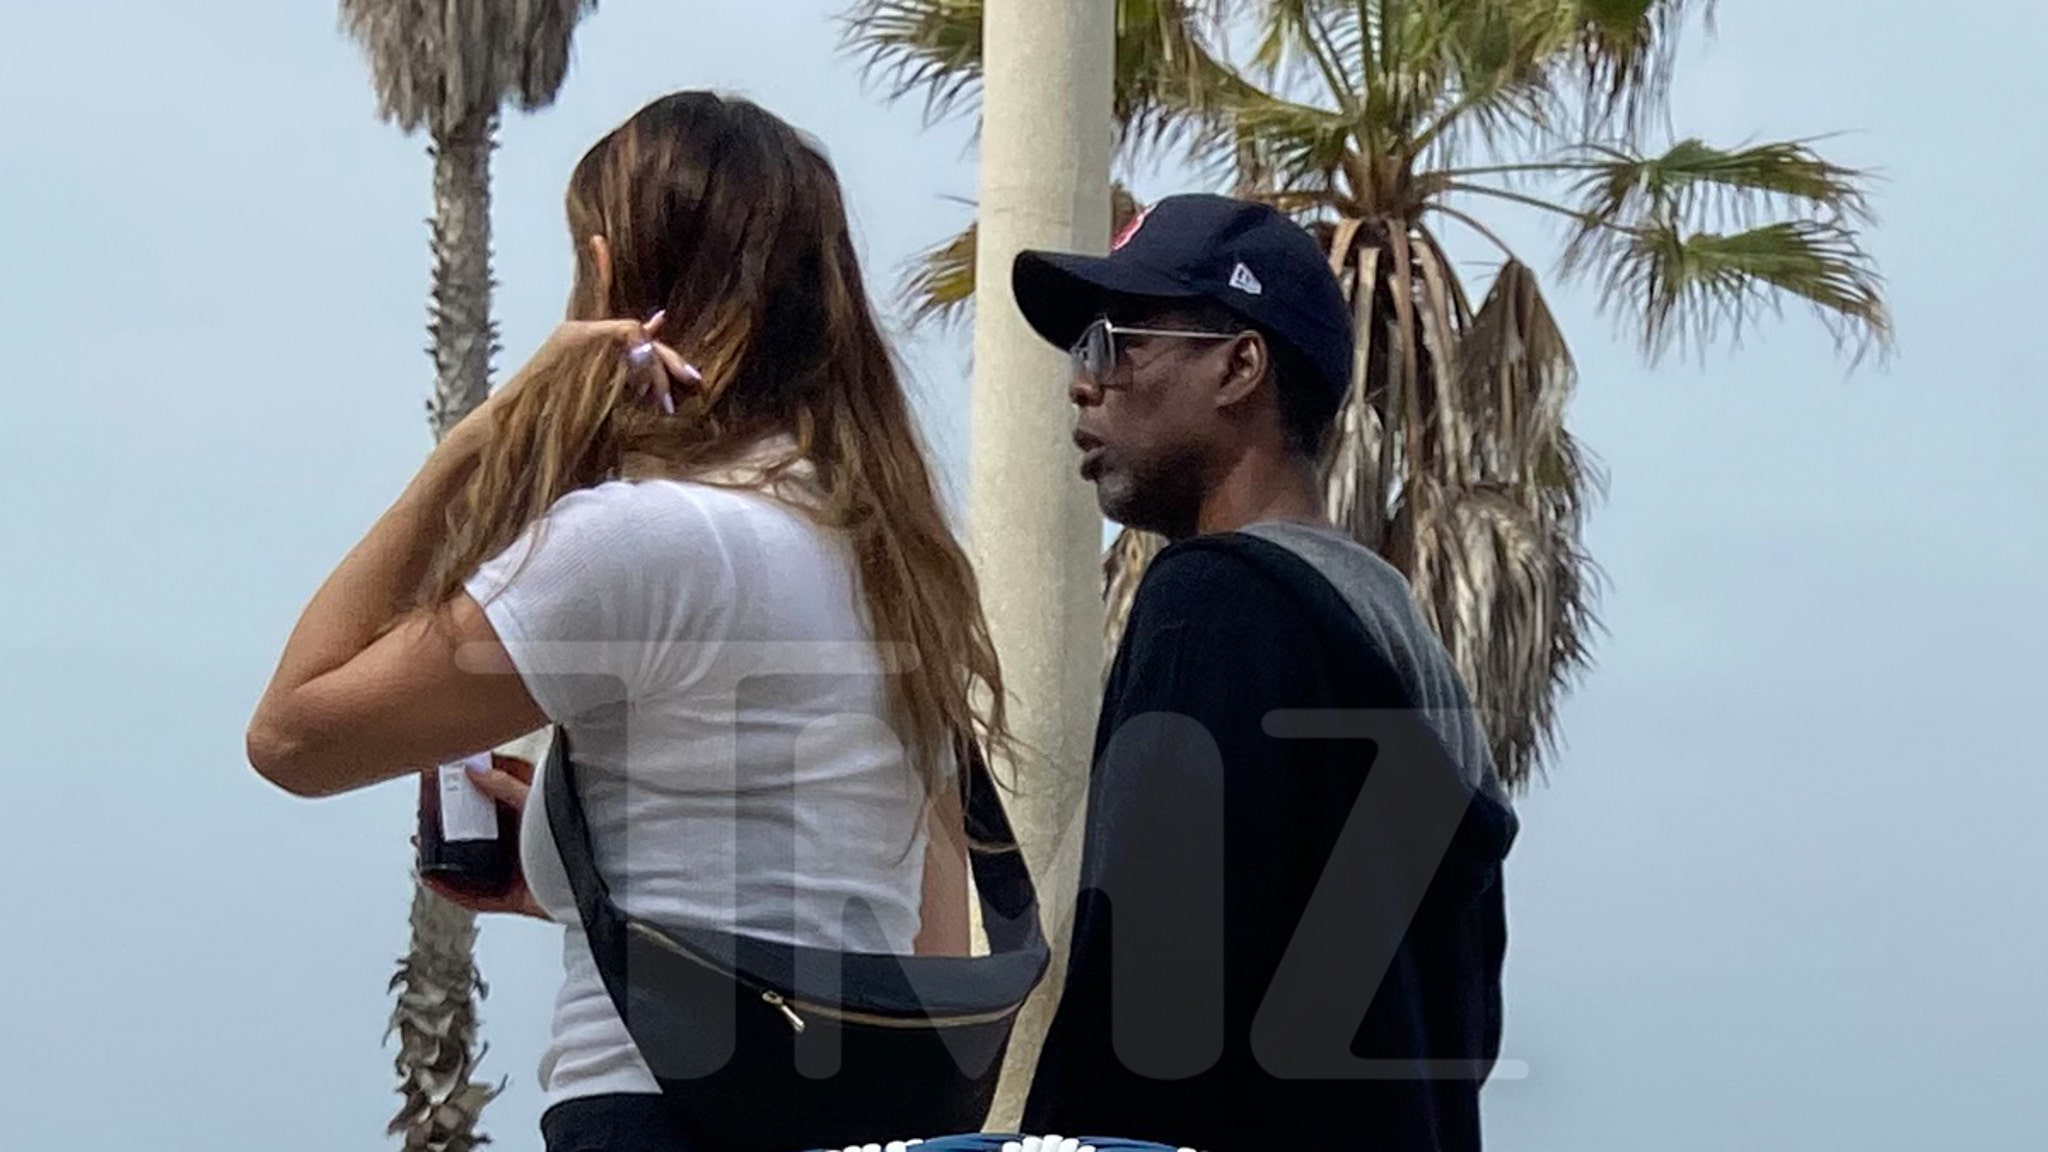 Chris Rock and Like Bell Out on a picnic in Santa Monica, the couple looks pretty serious